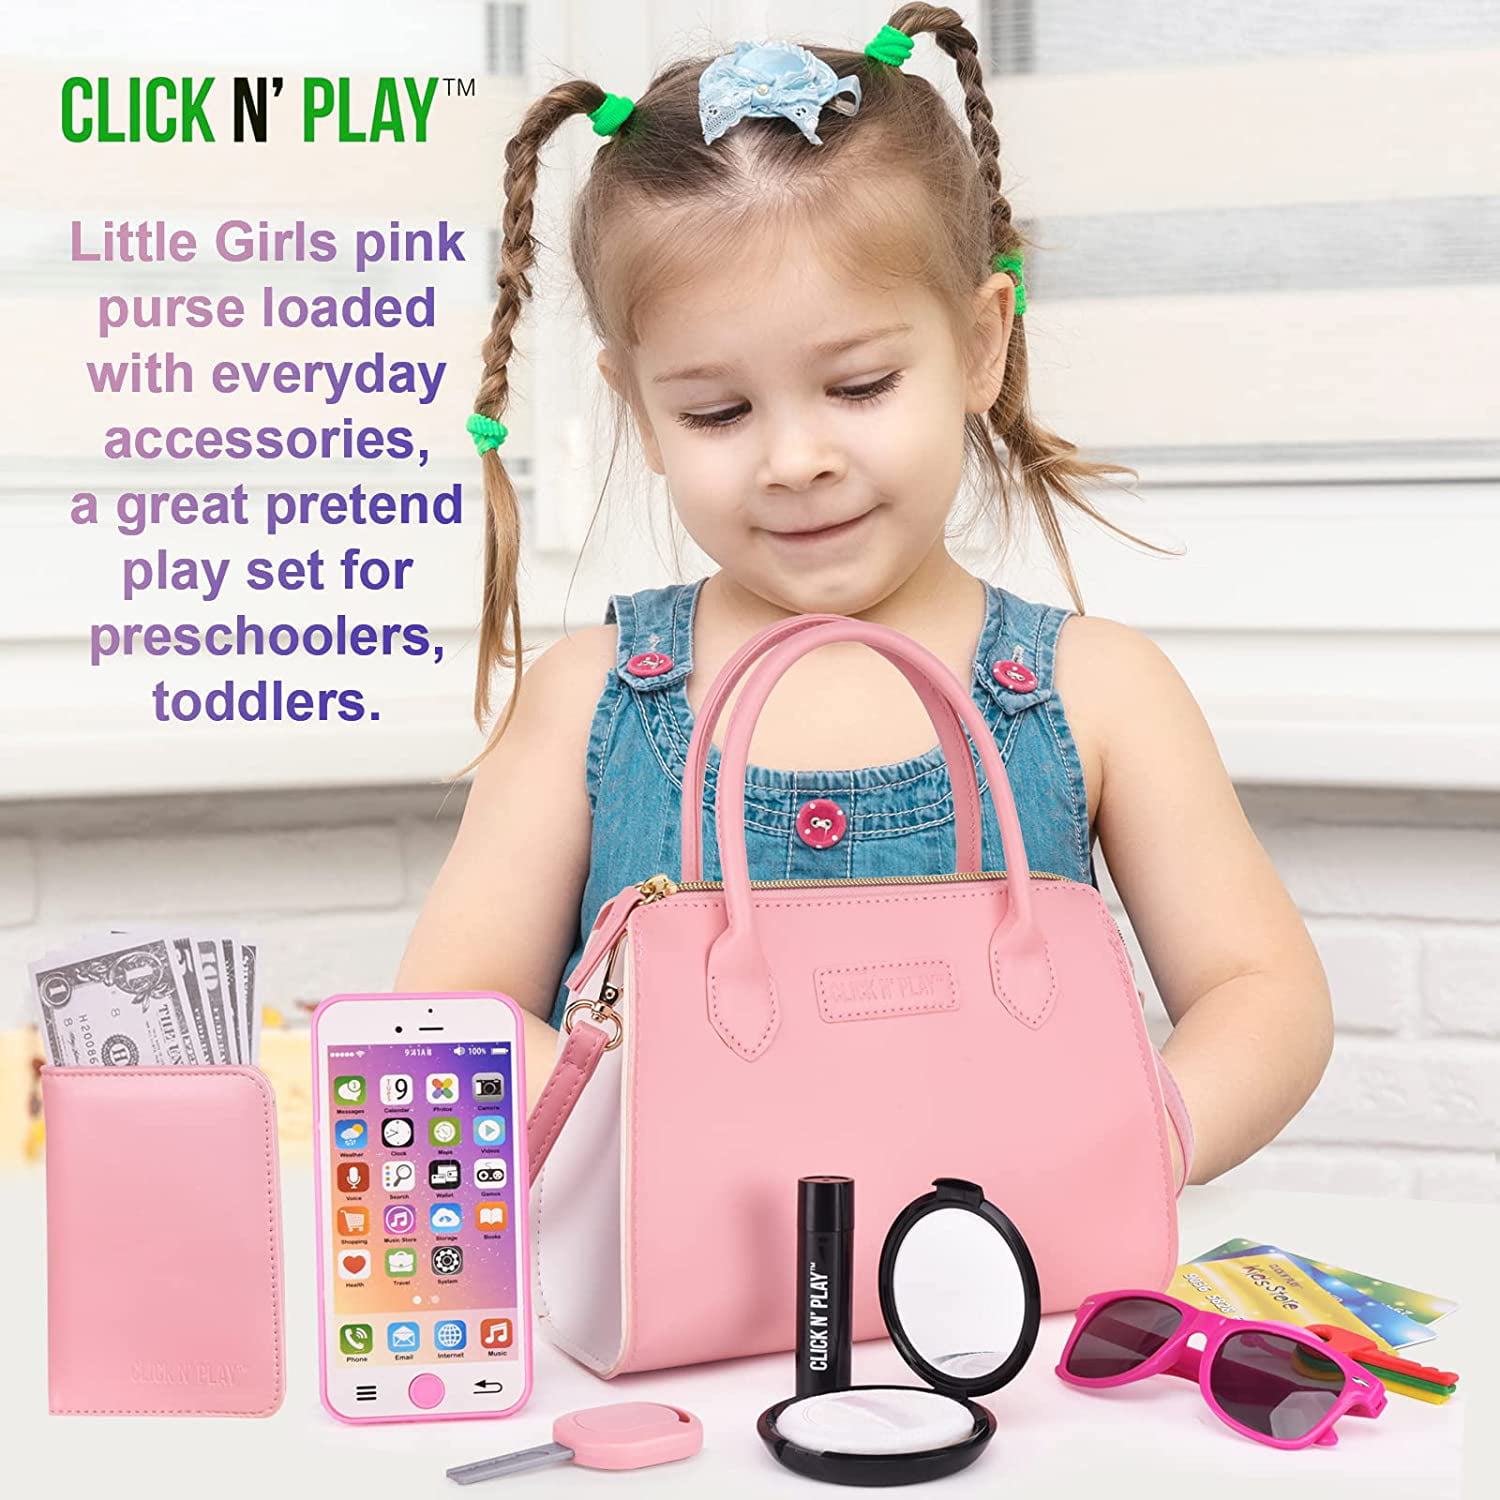 Dress Up America Girls Purse for Pretend Play Toys for 1, 2, 3 Year Old Girl  Birthday Gift - Walmart.com